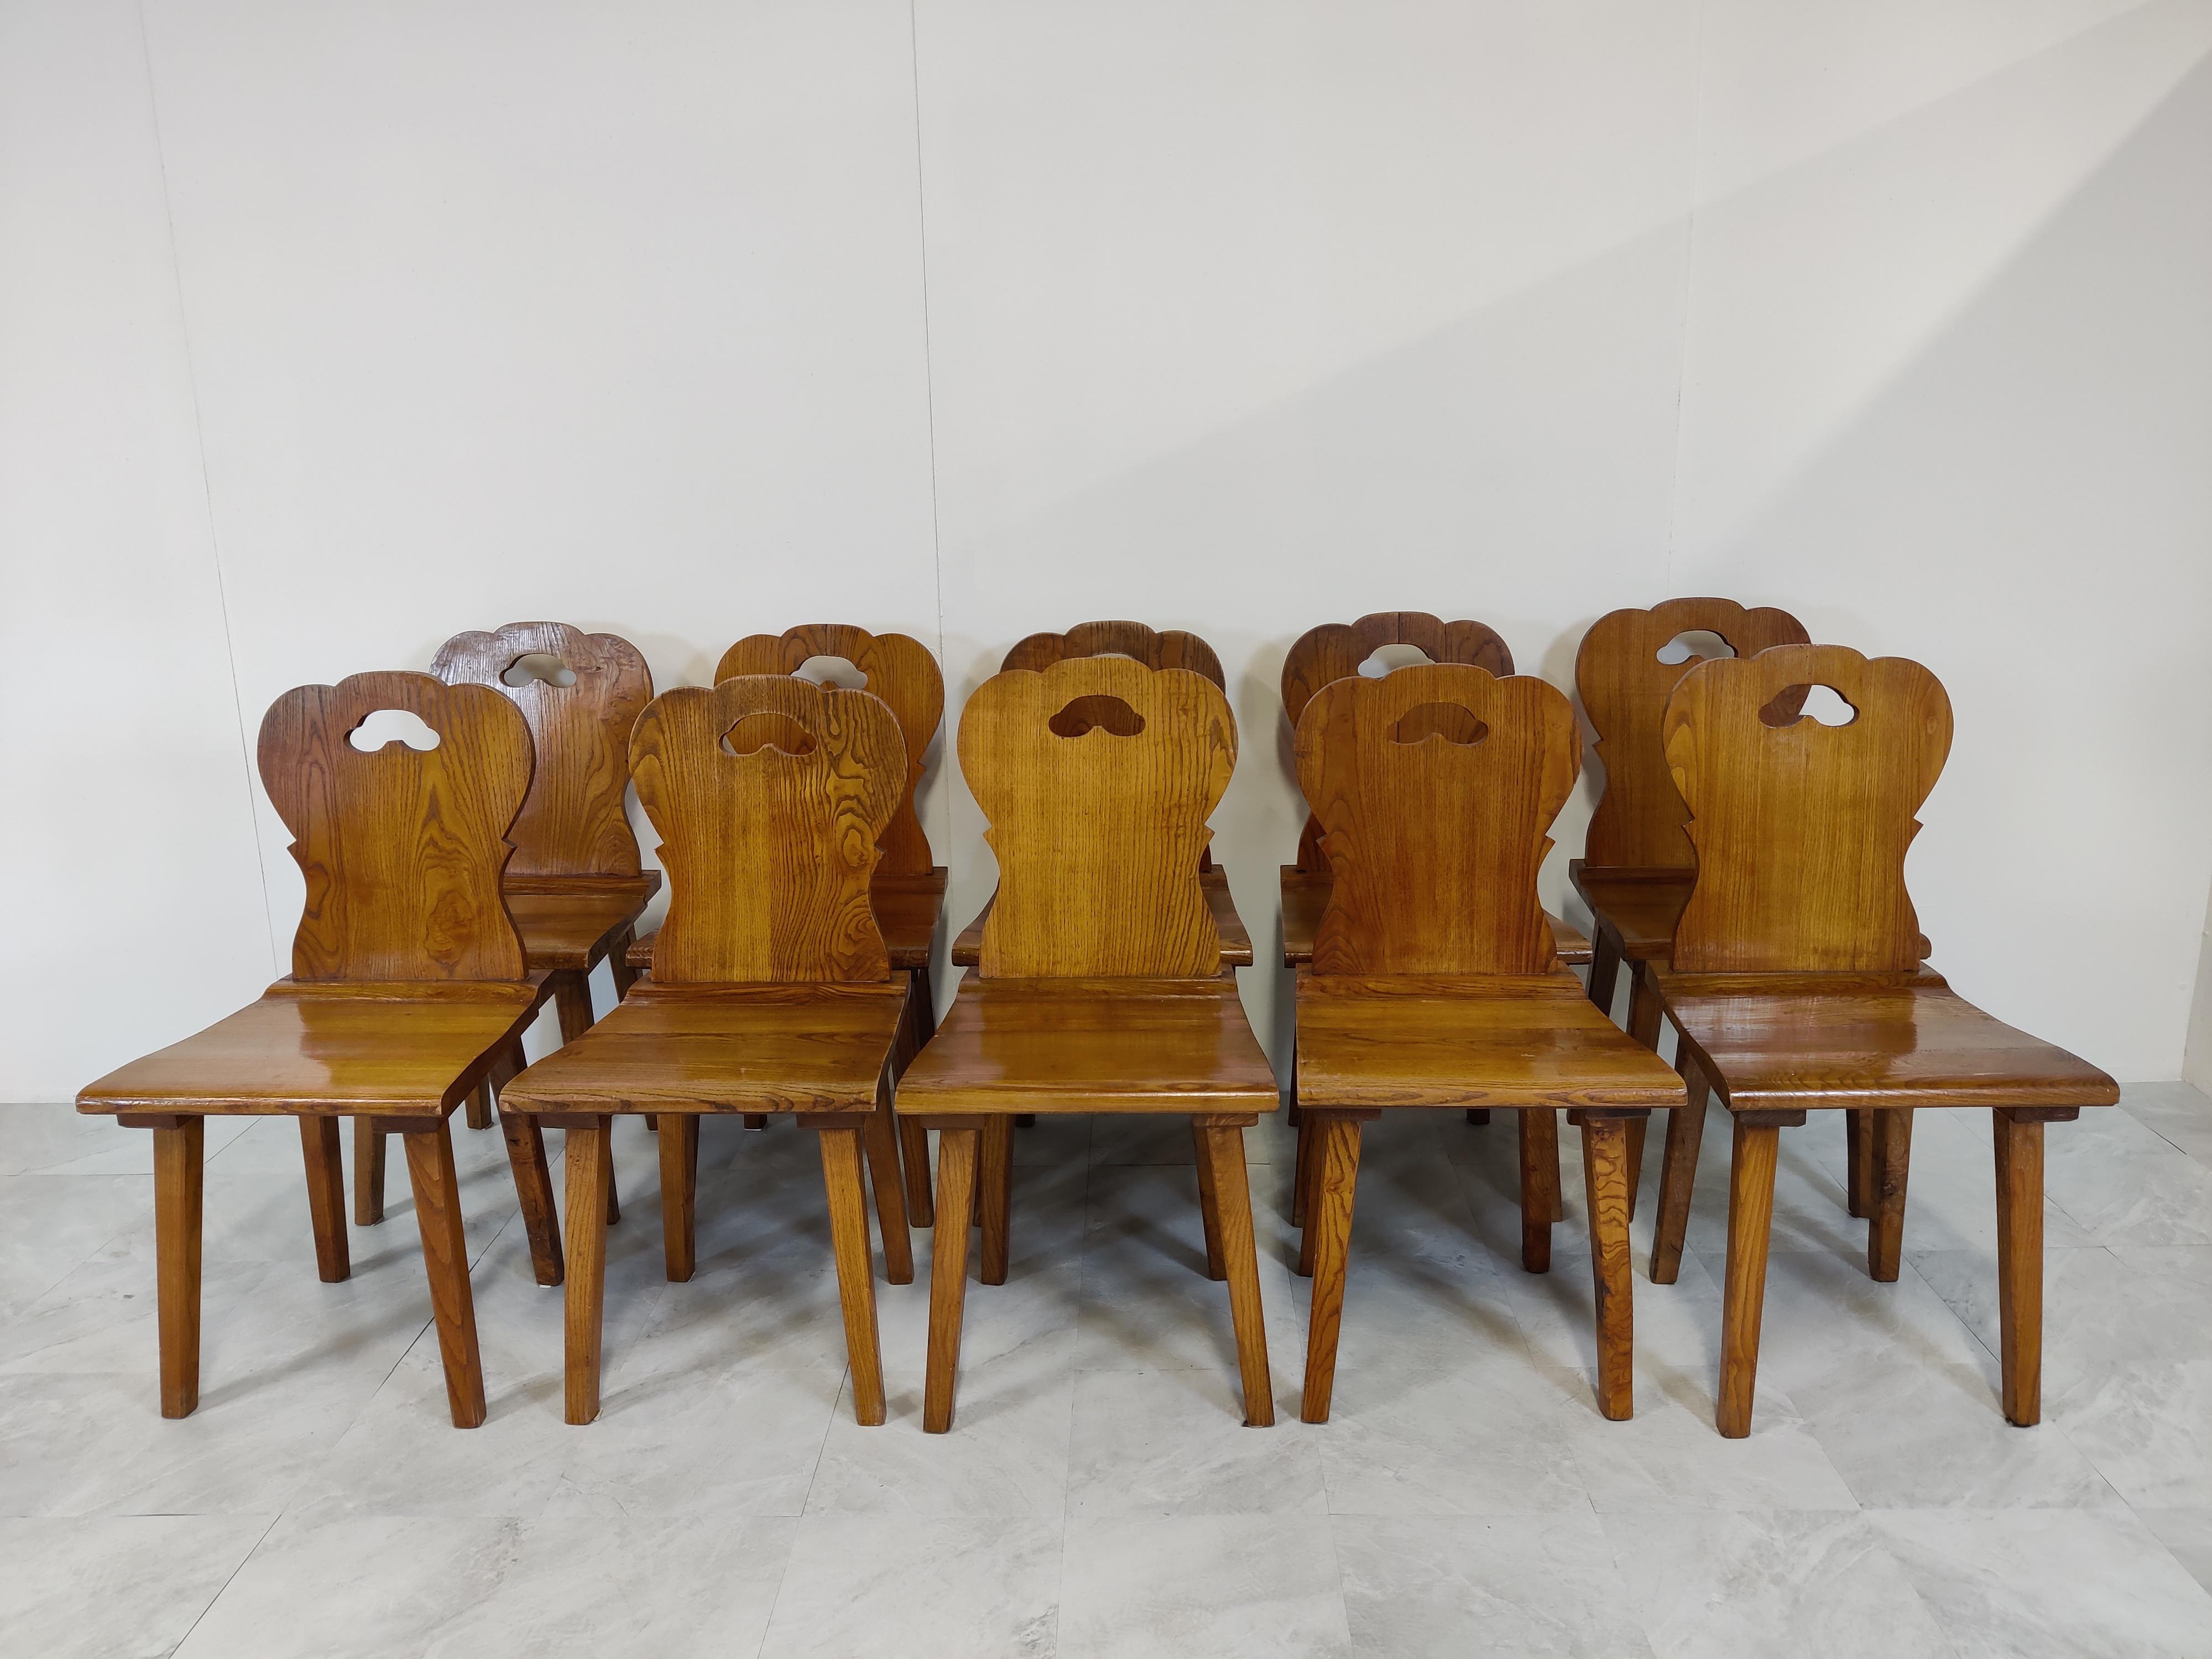 Rustic Vintage Oak Dining Chairs 1950s Set of 10